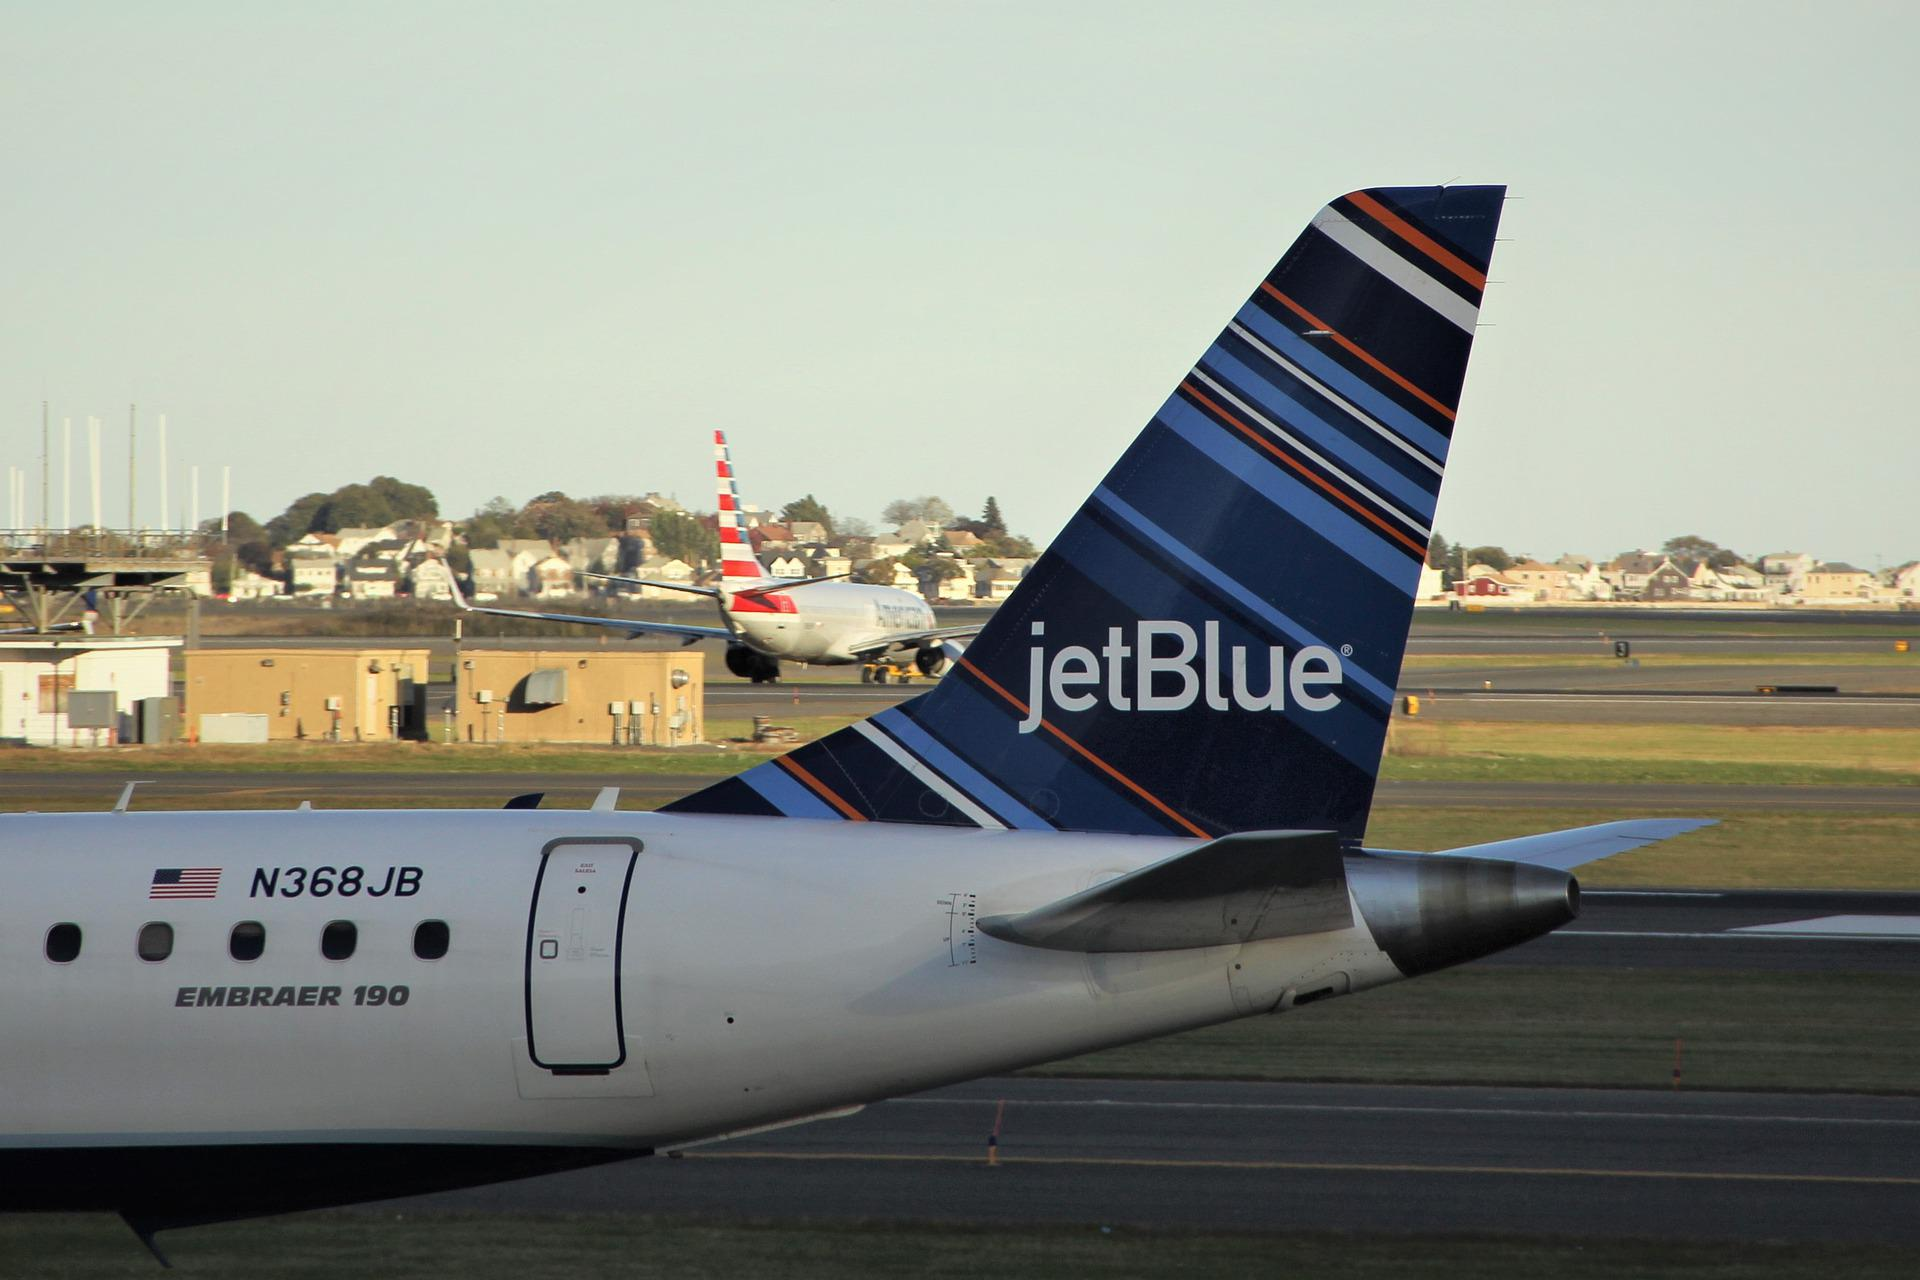 jetBlue Embraer 190 stationed at an airport tarmac.